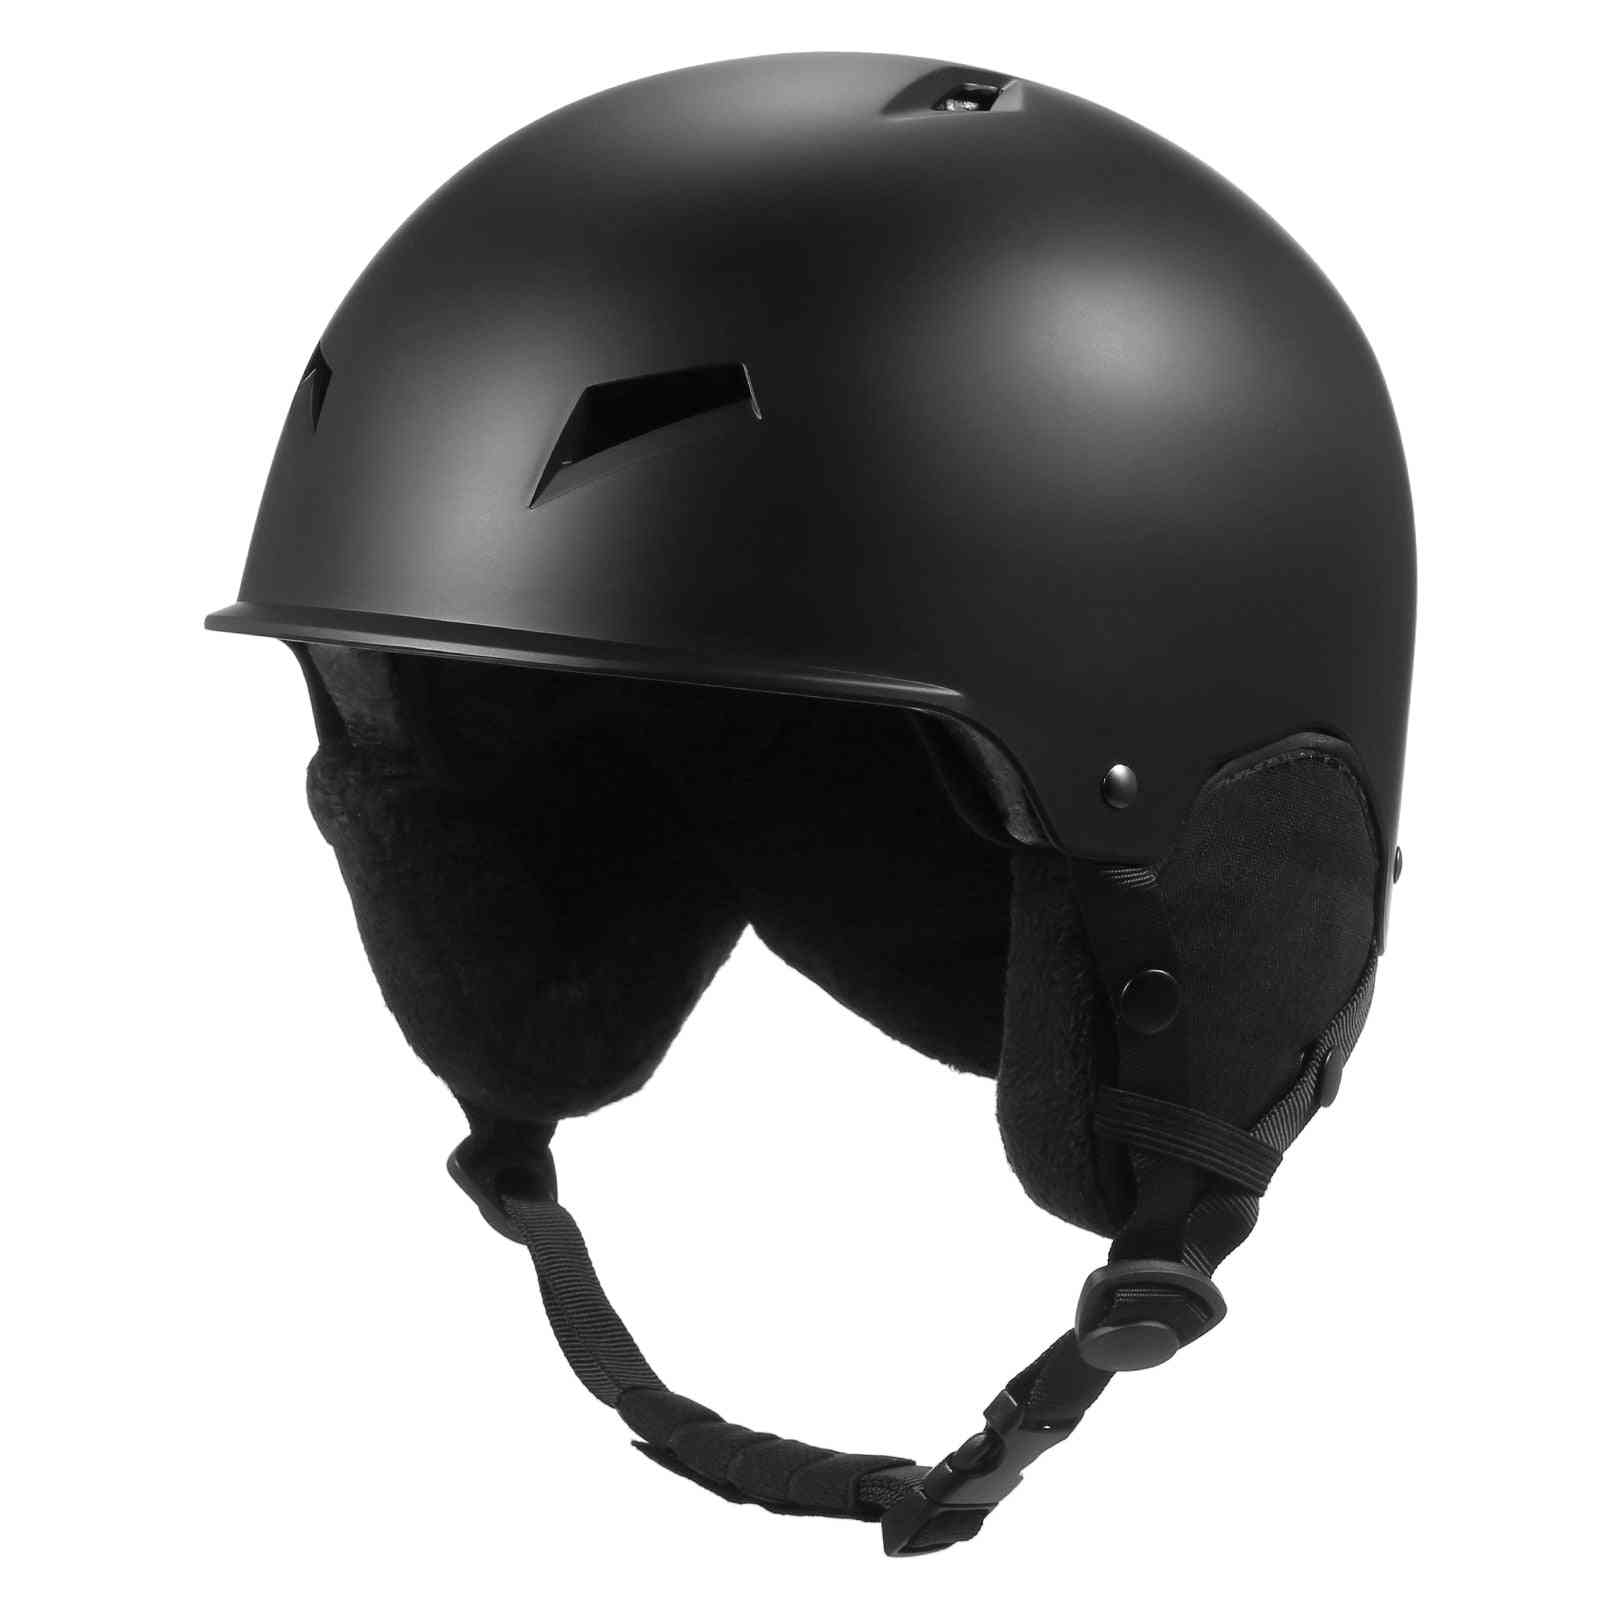 Snowboard Helmet With Goggle Fixed Strap